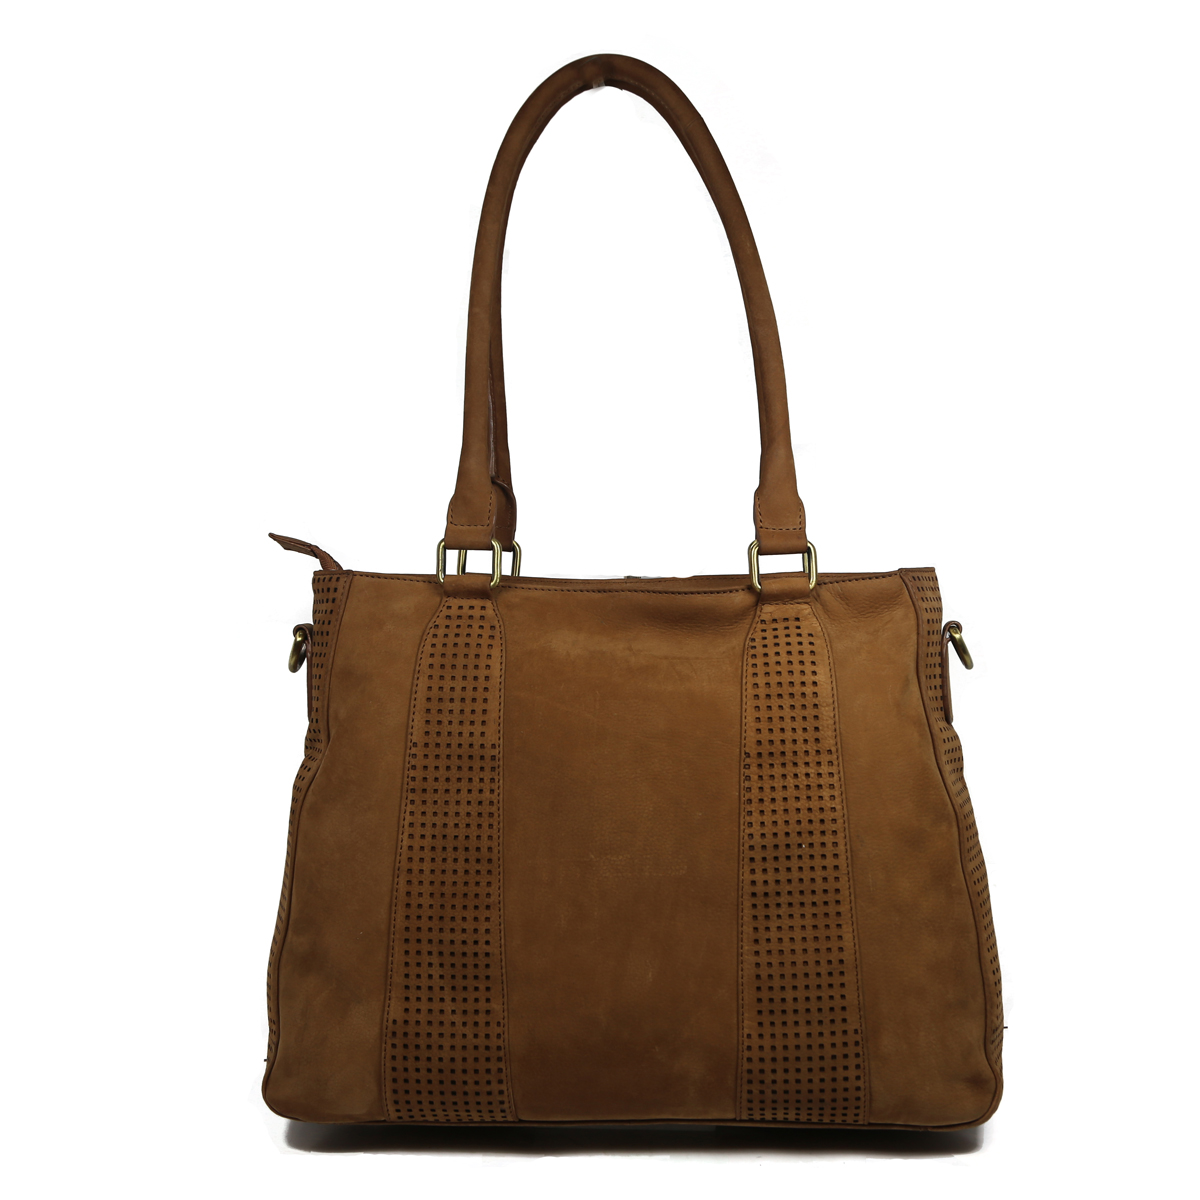 Tan Tote For Girls - Leatherman Fashion Private Limited